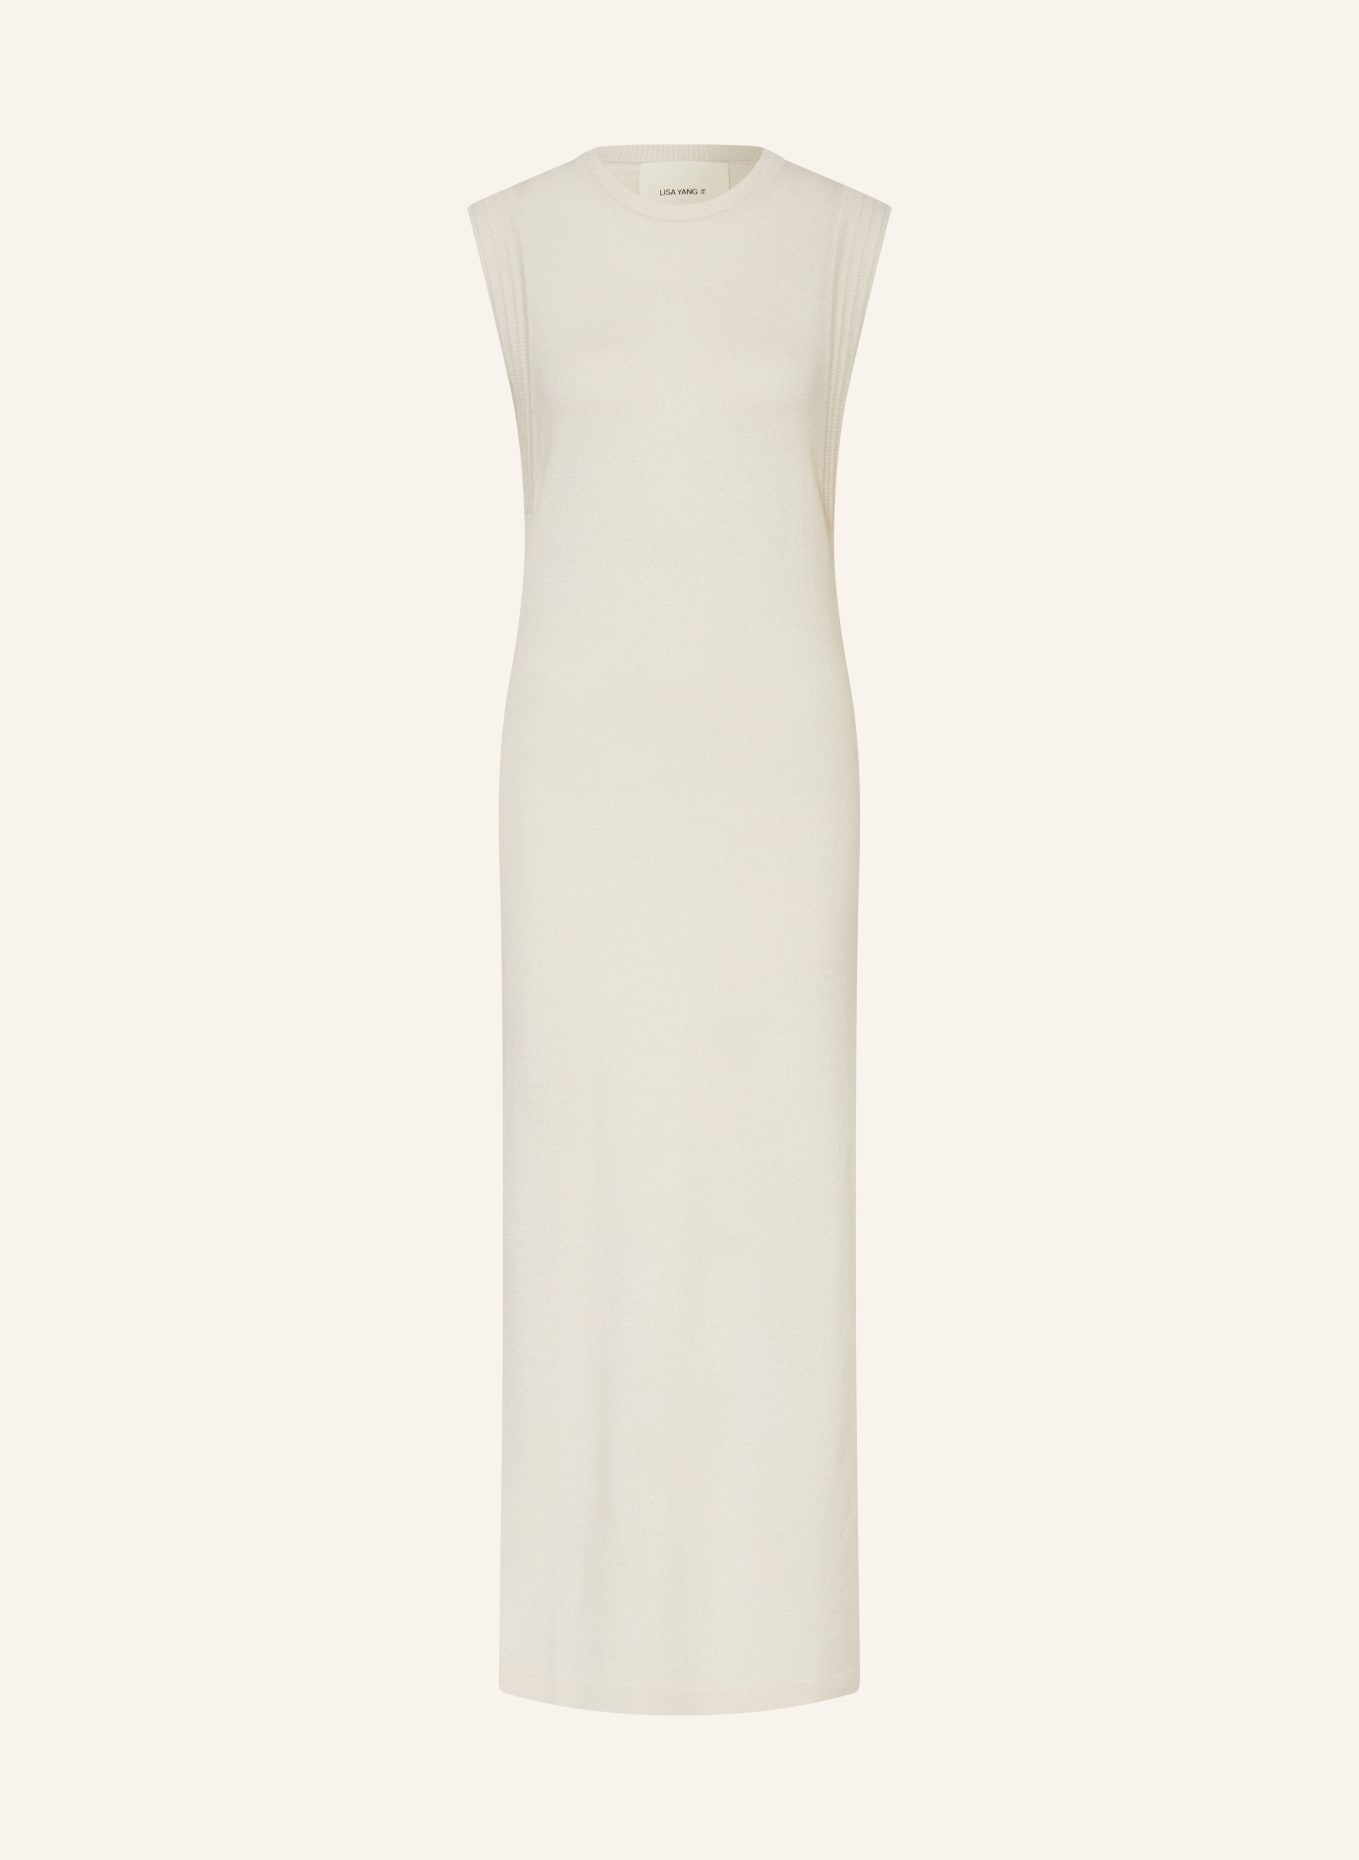 LISA YANG Knit dress made of cashmere with glitter thread, Color: CREAM (Image 1)